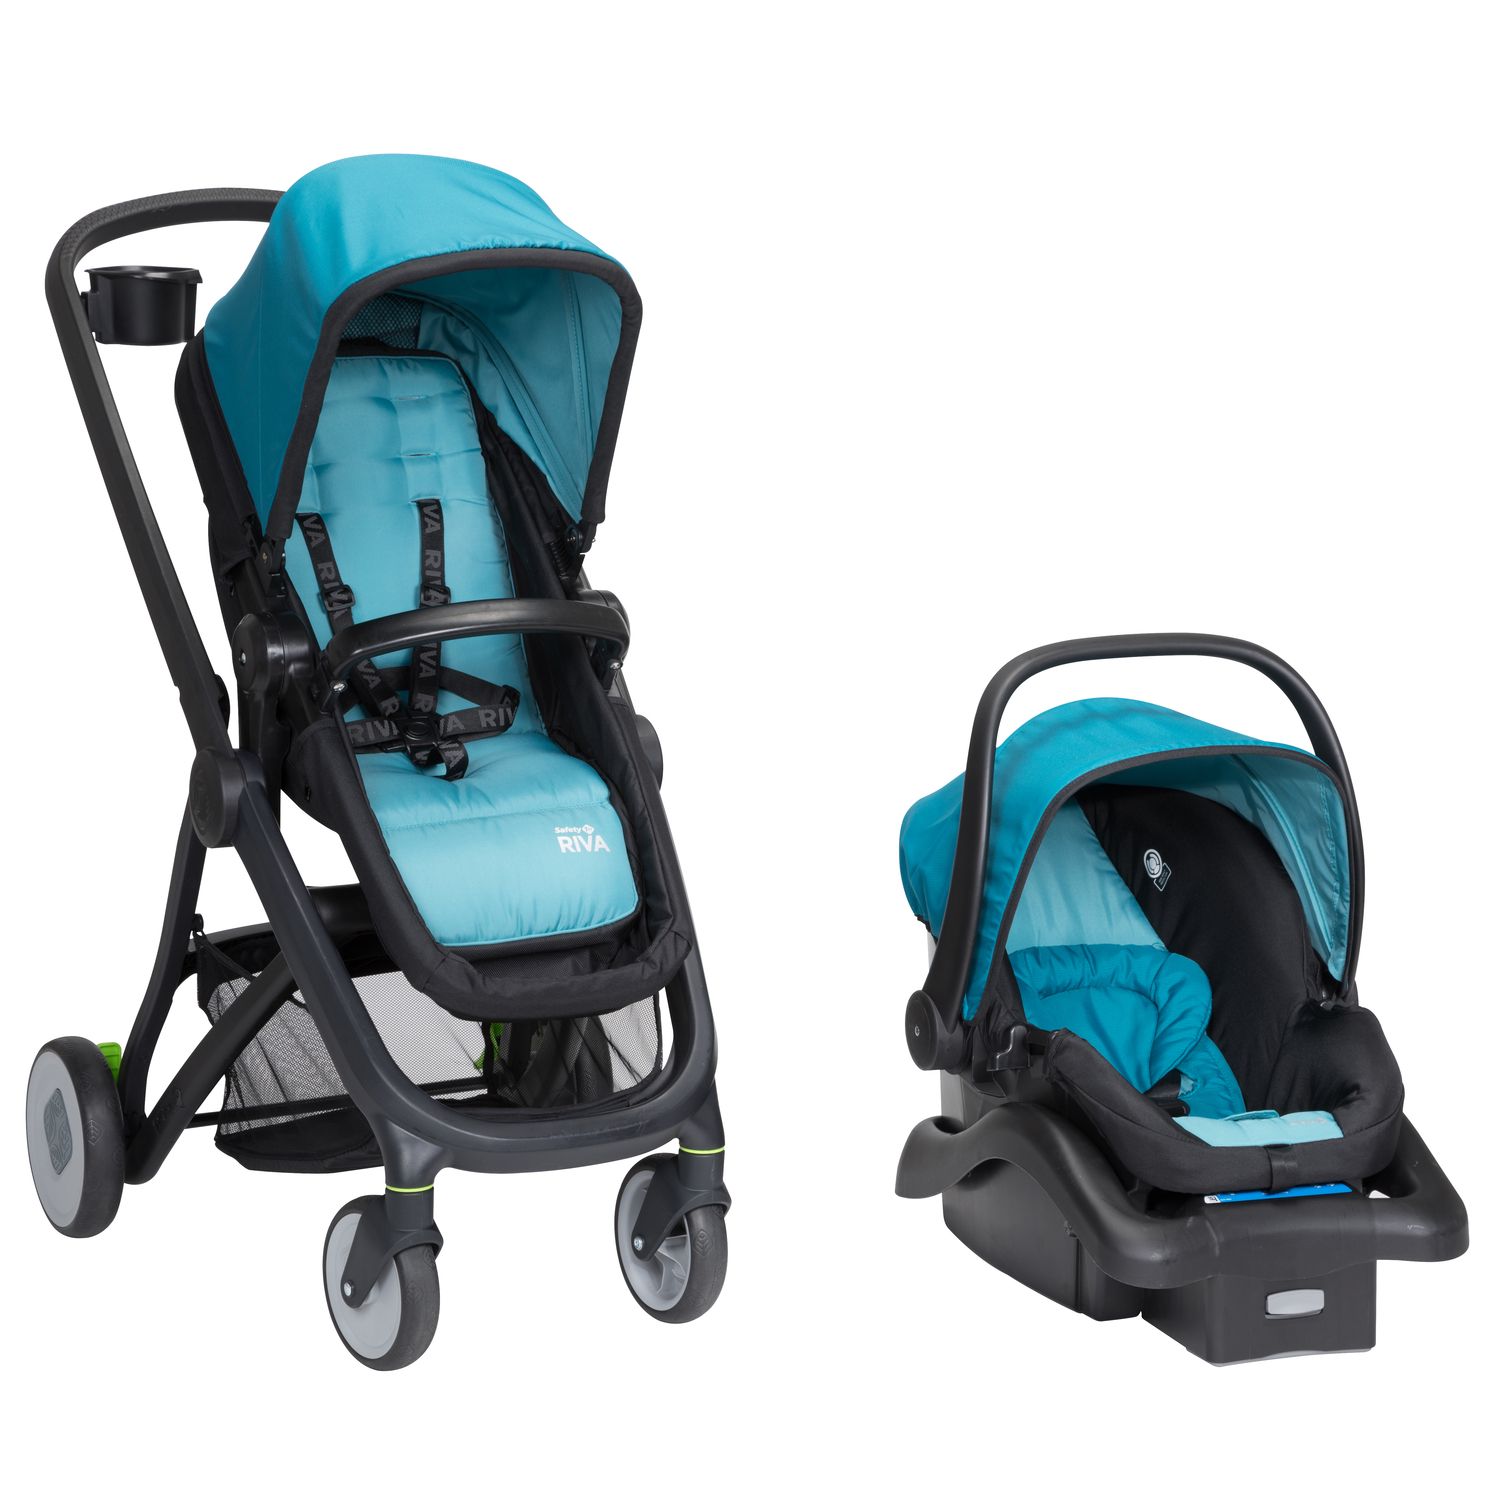 safety 1st smooth ride travel system base